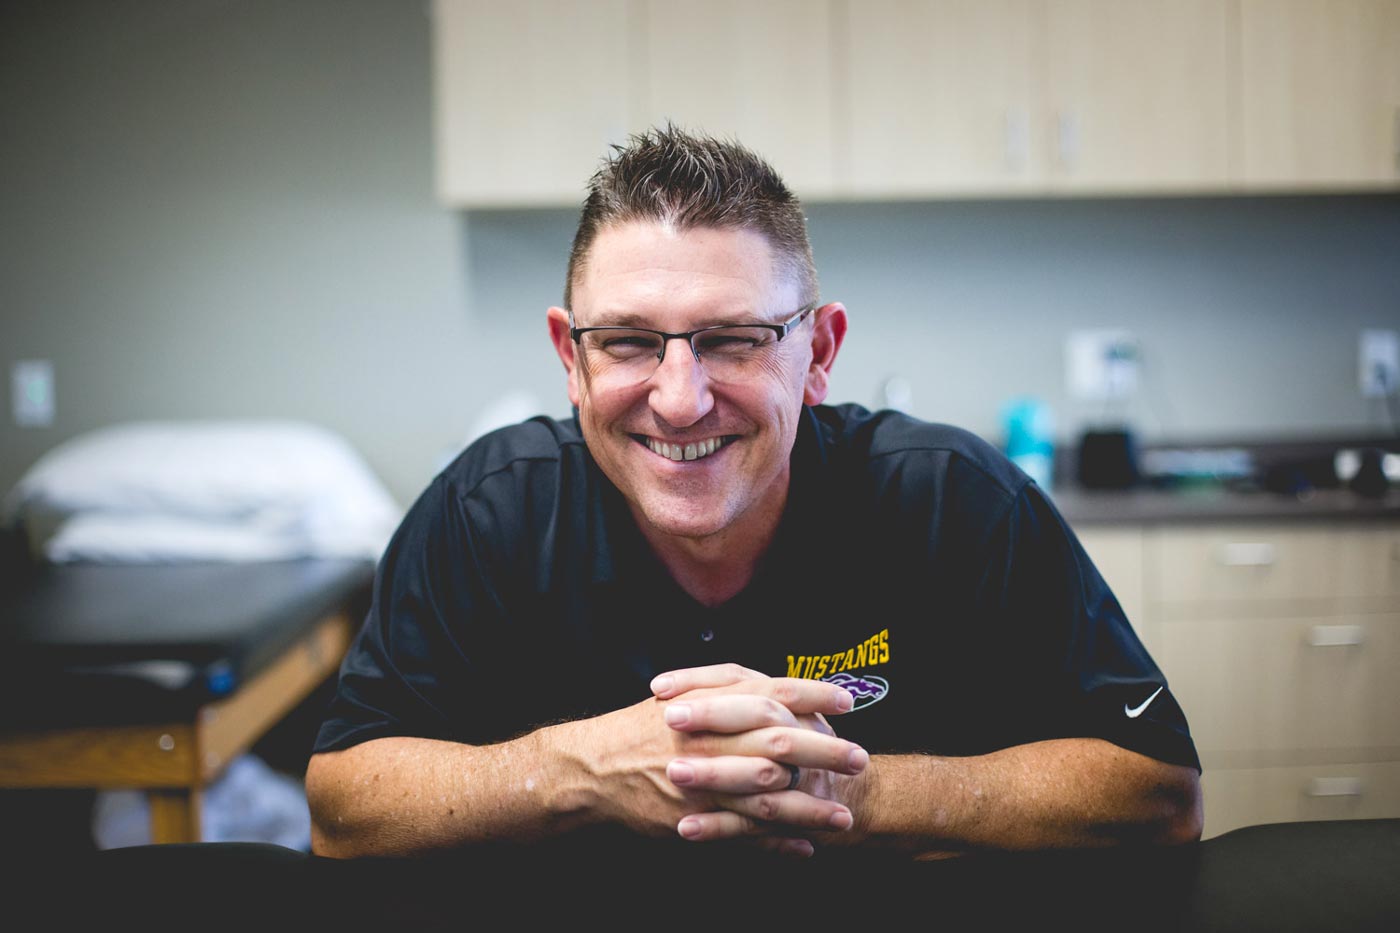 lead-physical-therapist-Mark-jagodzinski-at-rise-ortho-sports-pt-in-surprise-az-photo-by-danielle-at-prefocus-solutions